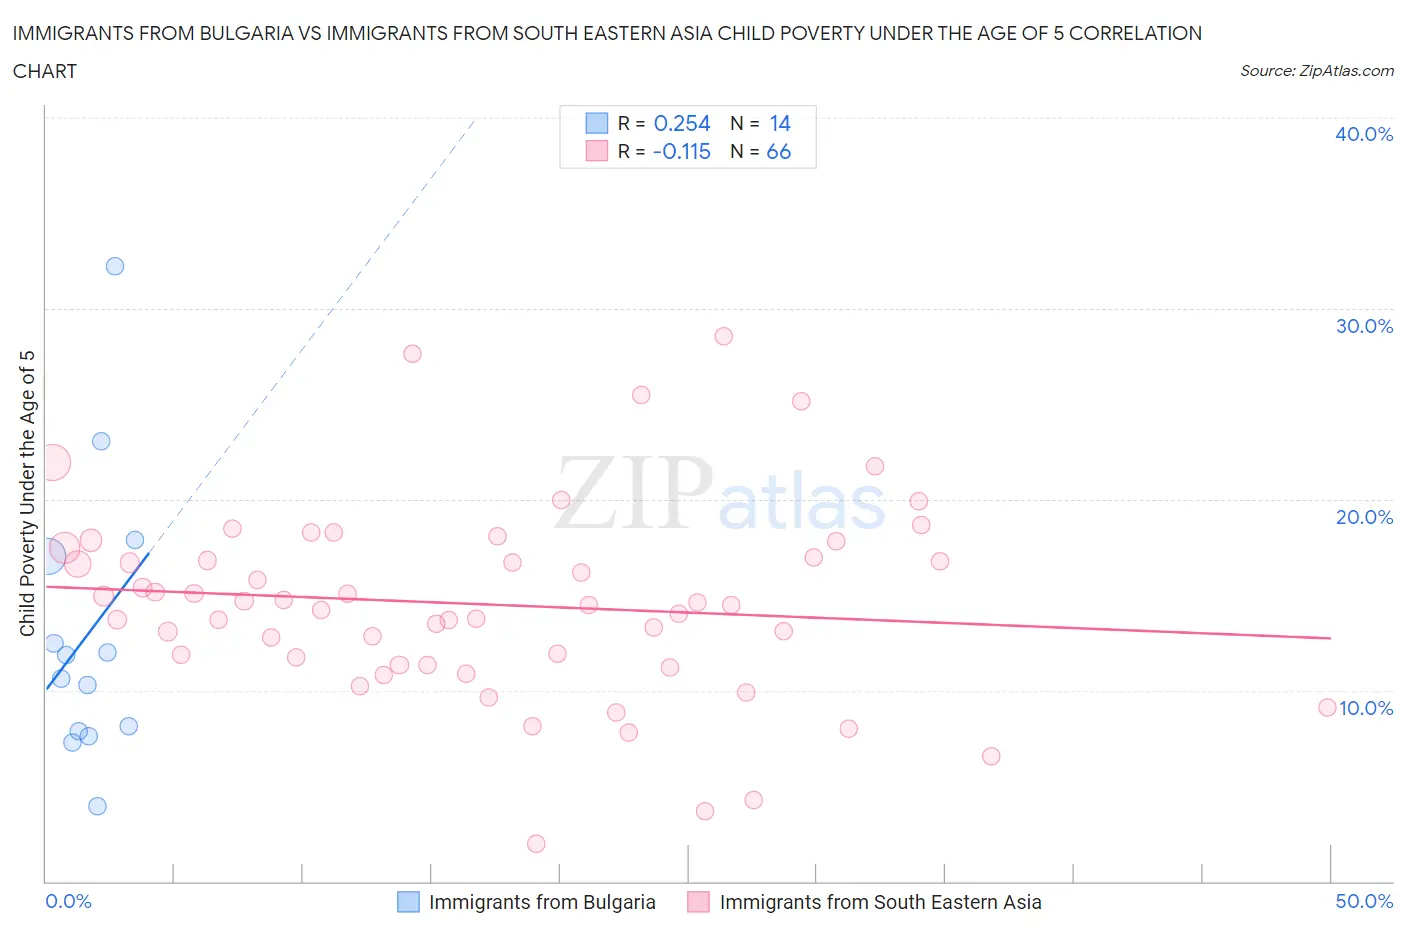 Immigrants from Bulgaria vs Immigrants from South Eastern Asia Child Poverty Under the Age of 5